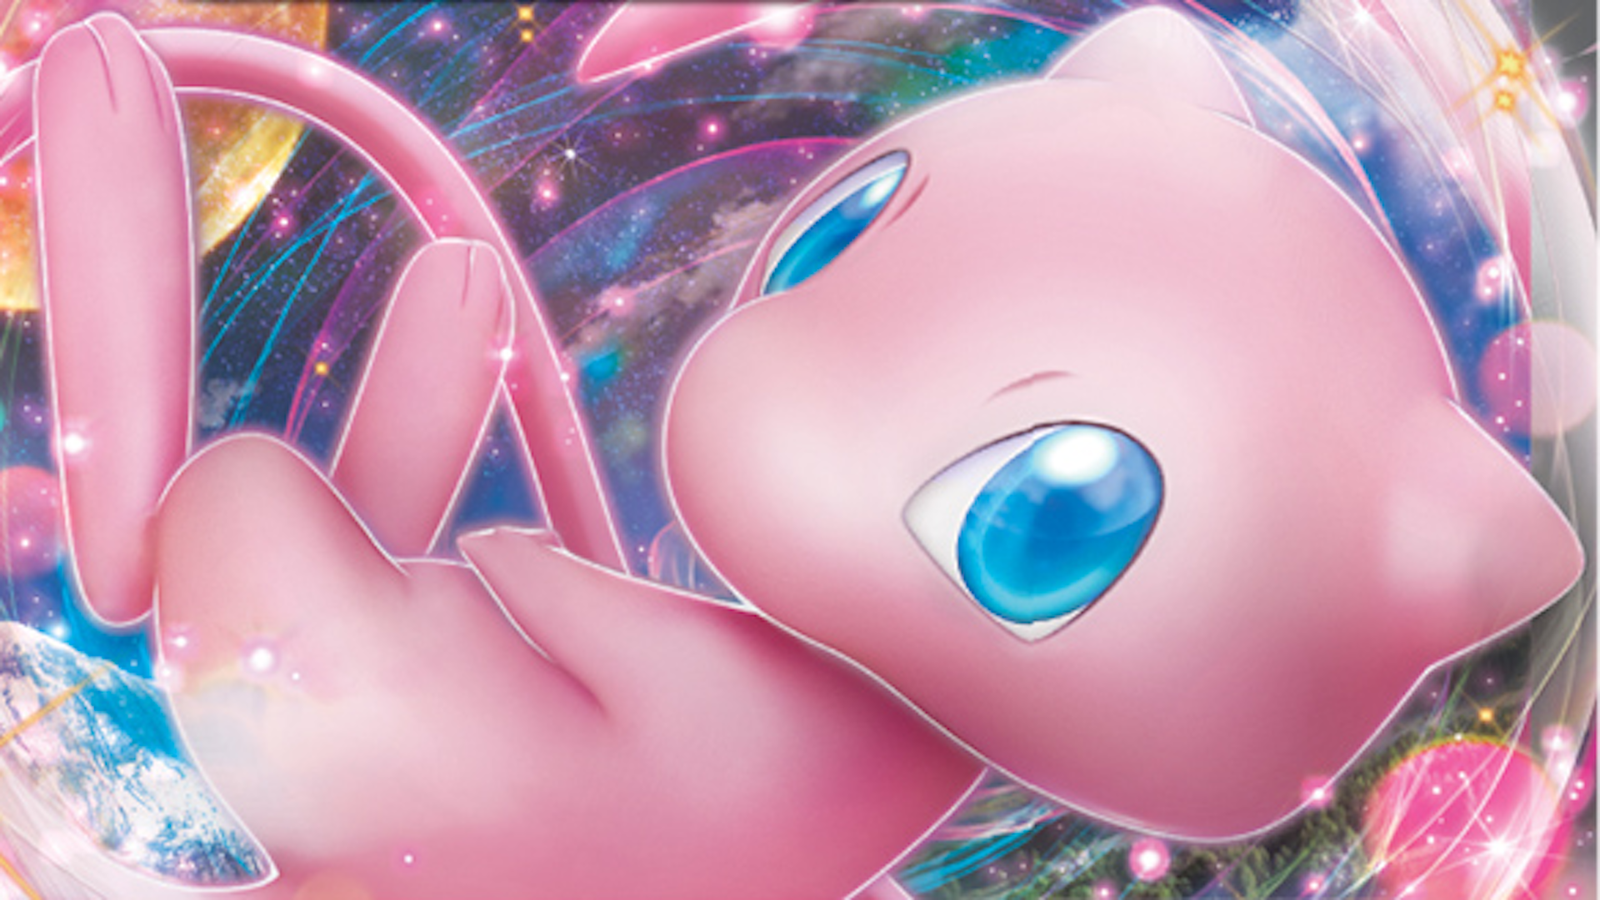 Mew and Mewtwo are officially coming to Pokémon Scarlet and Violet